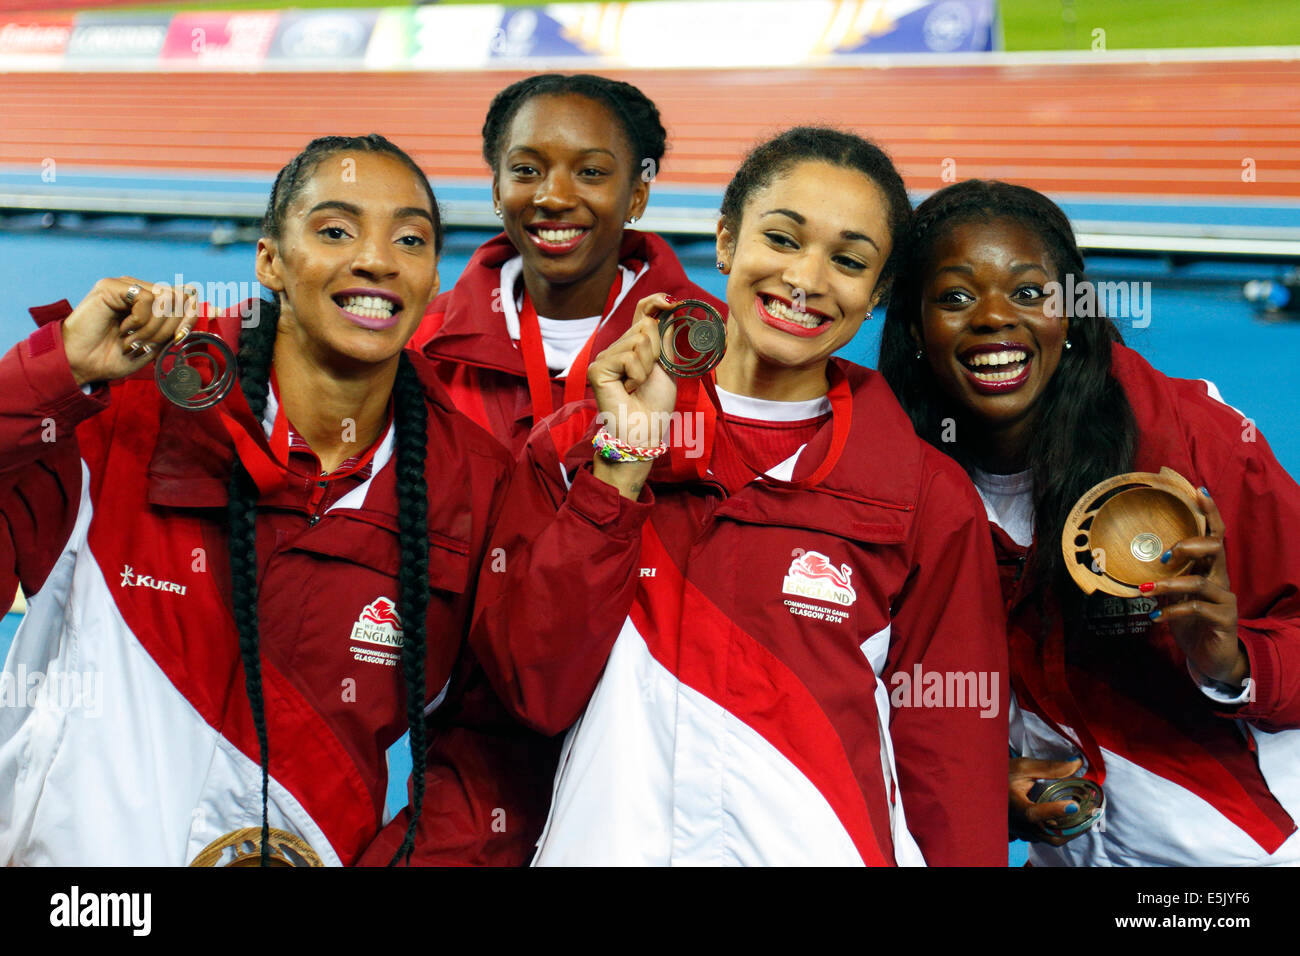 Hampden Park, Glasgow, Scotland, UK, Saturday, 2nd August, 2014. Glasgow 2014 Commonwealth Games, Women's 4 x 100m Relay, Medal Ceremony, Bronze Medal winners England. Left to Right. Ashleigh Nelson, Bianca Williams, Jodie Williams, Asha Philip Stock Photo